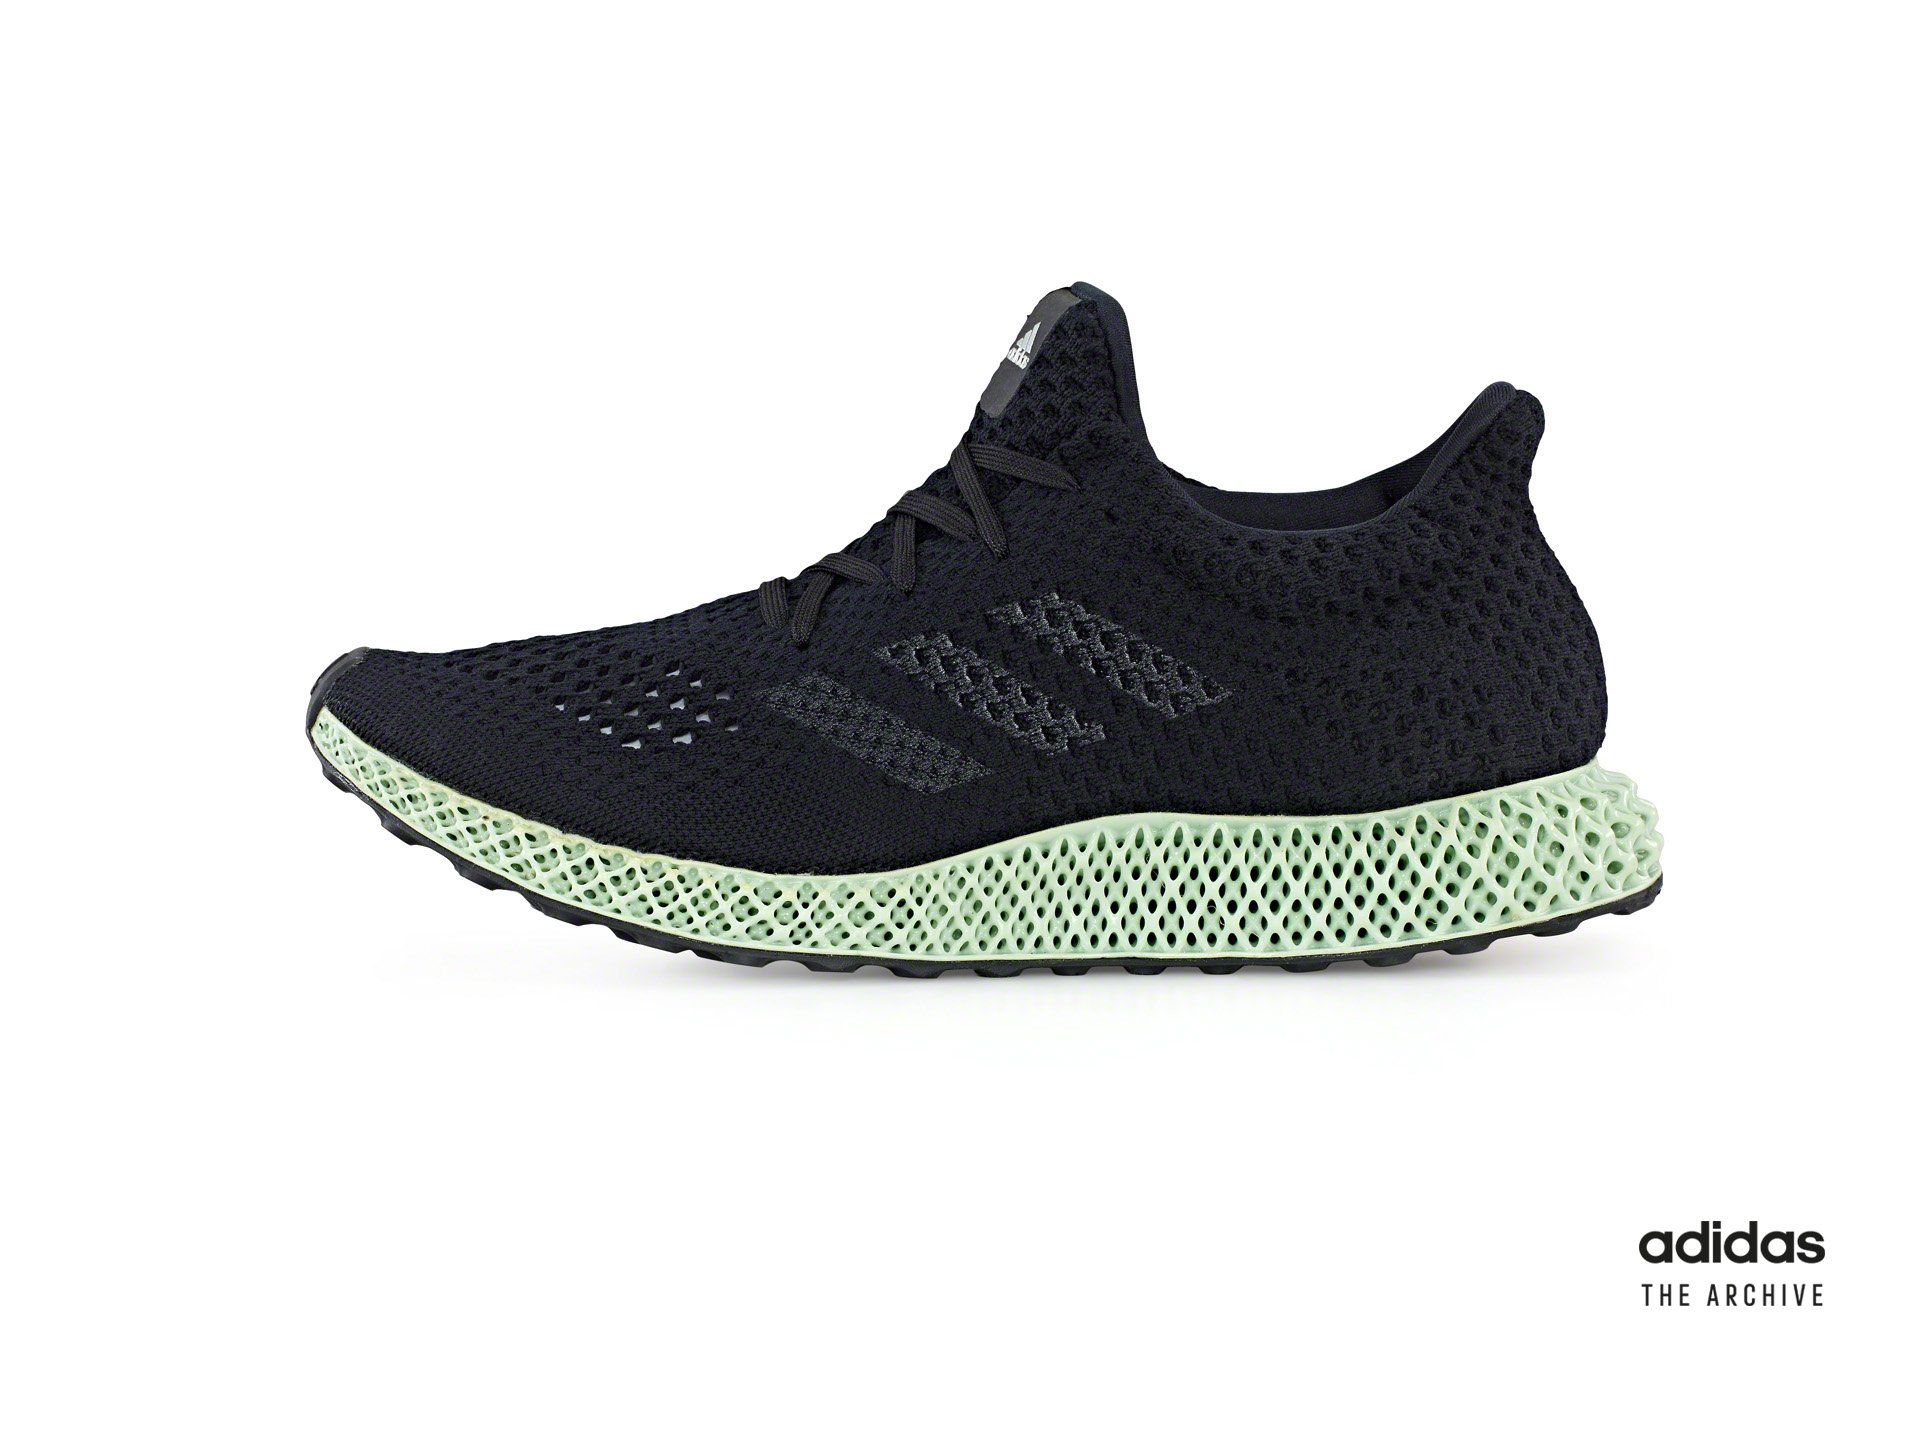 adidas on Twitter: "2017, Futurecraft 4D​ ​ With increased awareness of  sustainability came further innovation of technologies. The Futurecraft 4D  began a new way of crafting sneakers, with the midsole born from